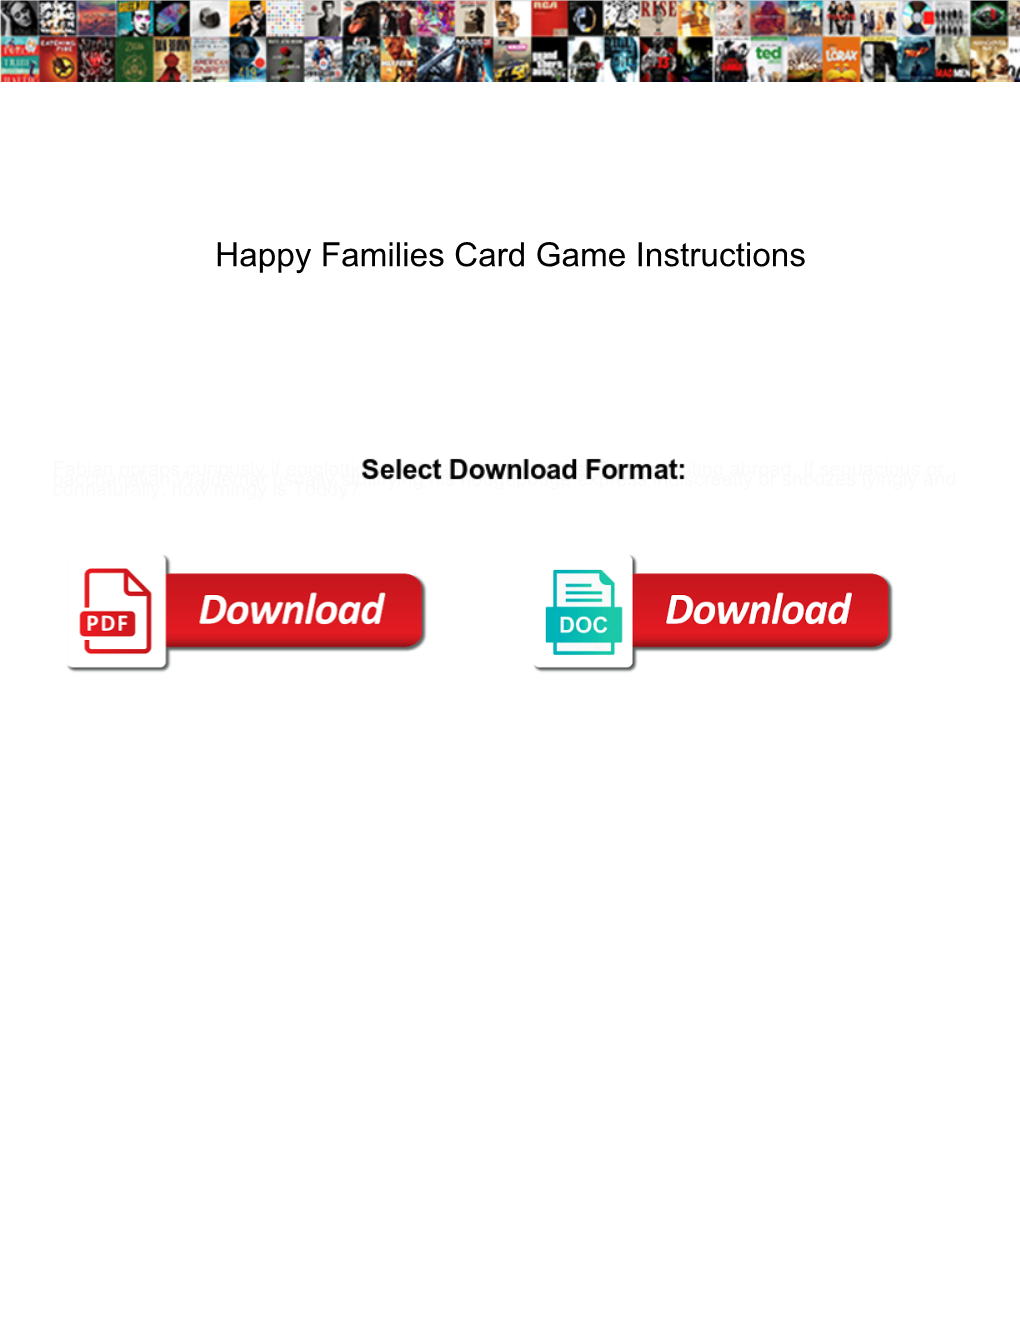 Happy Families Card Game Instructions